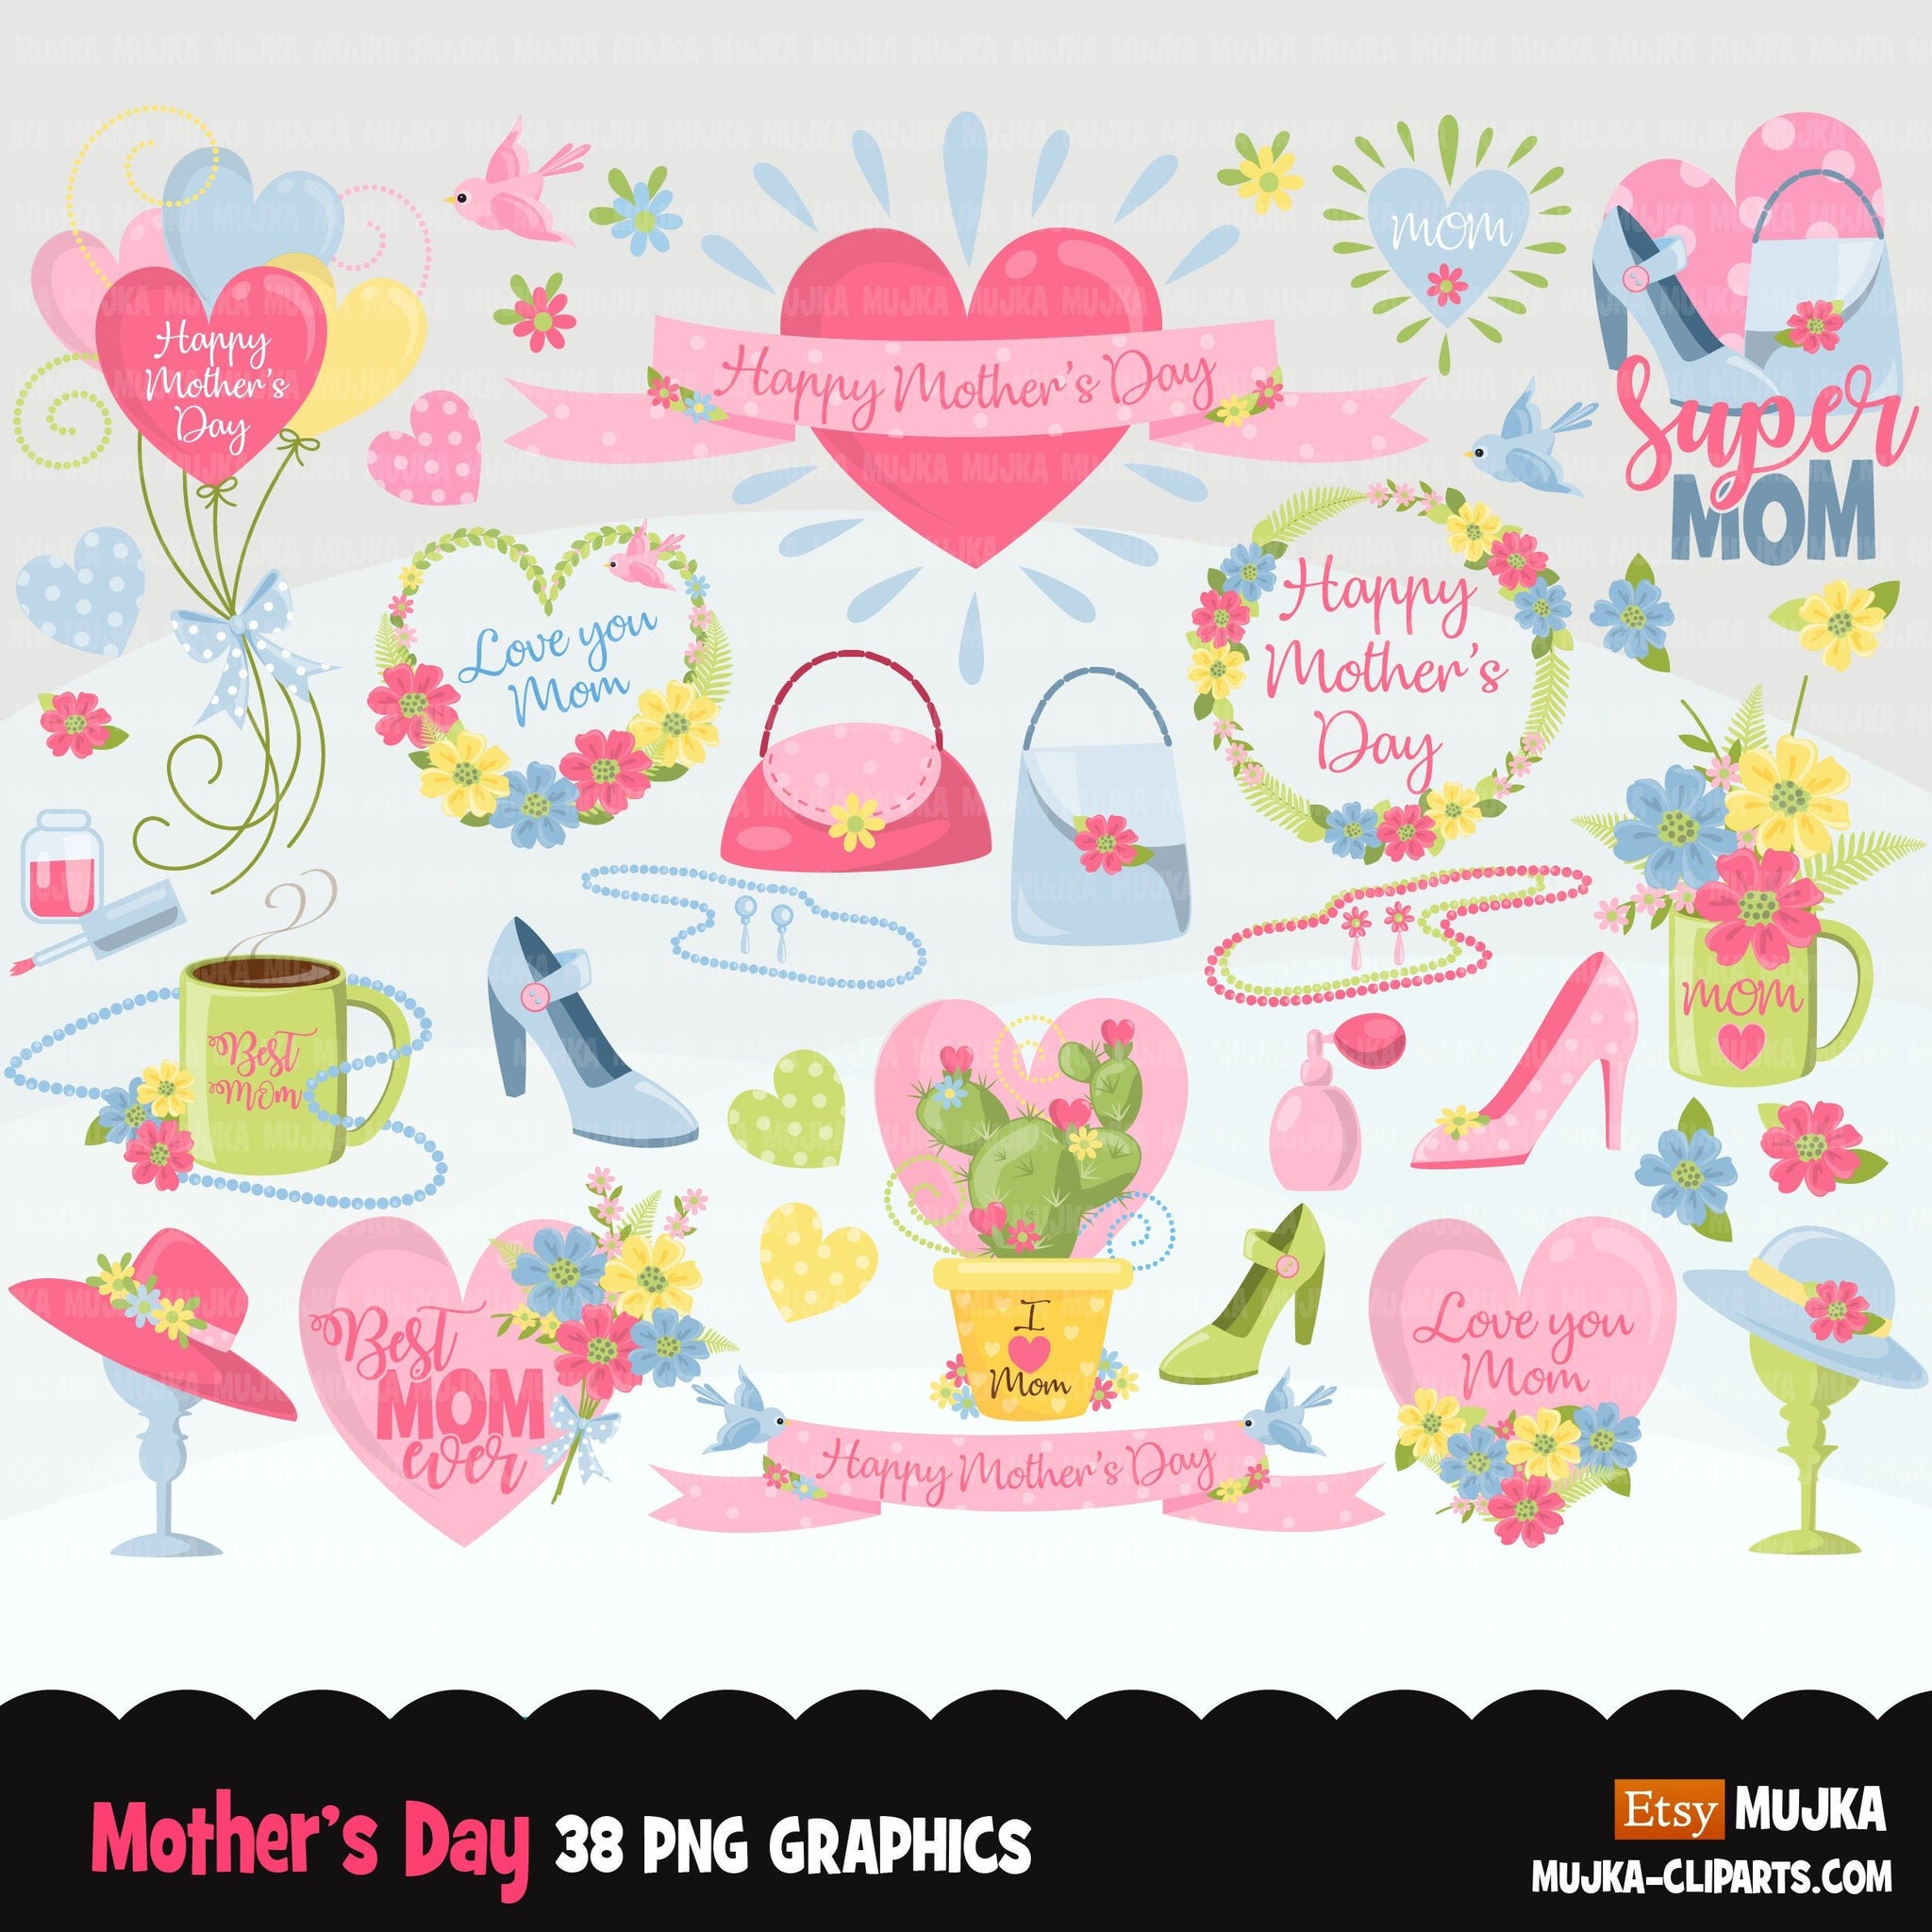 Mother's Day Clipart, floral frames, mom, mum love quotes, coffee, hearts, high heels, perfume, gift graphics, PNG clip art